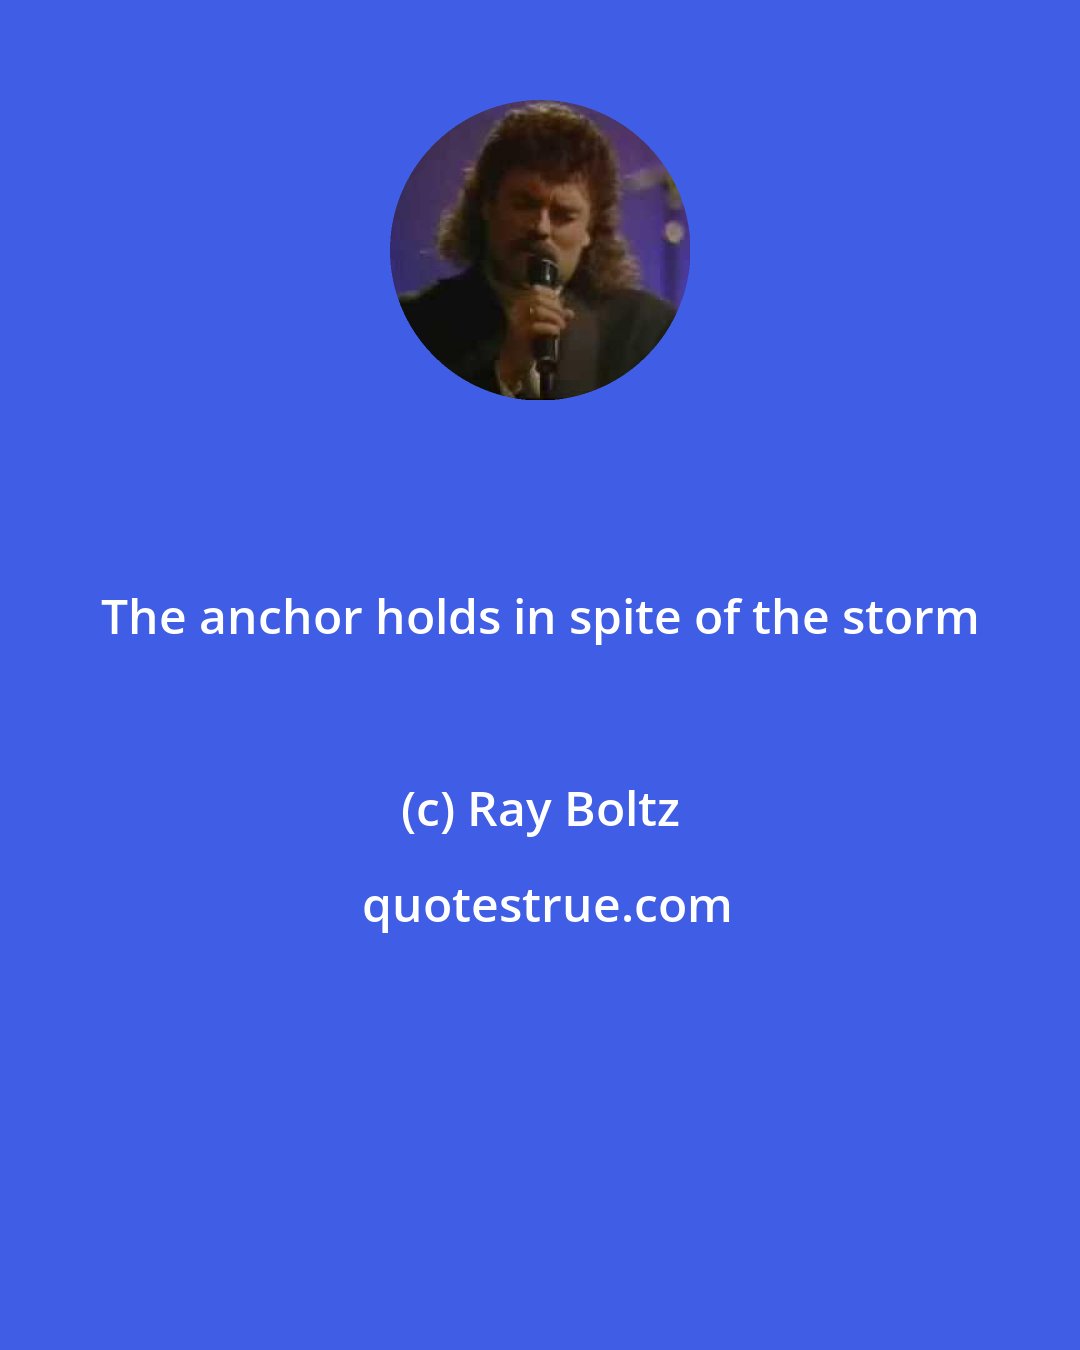 Ray Boltz: The anchor holds in spite of the storm